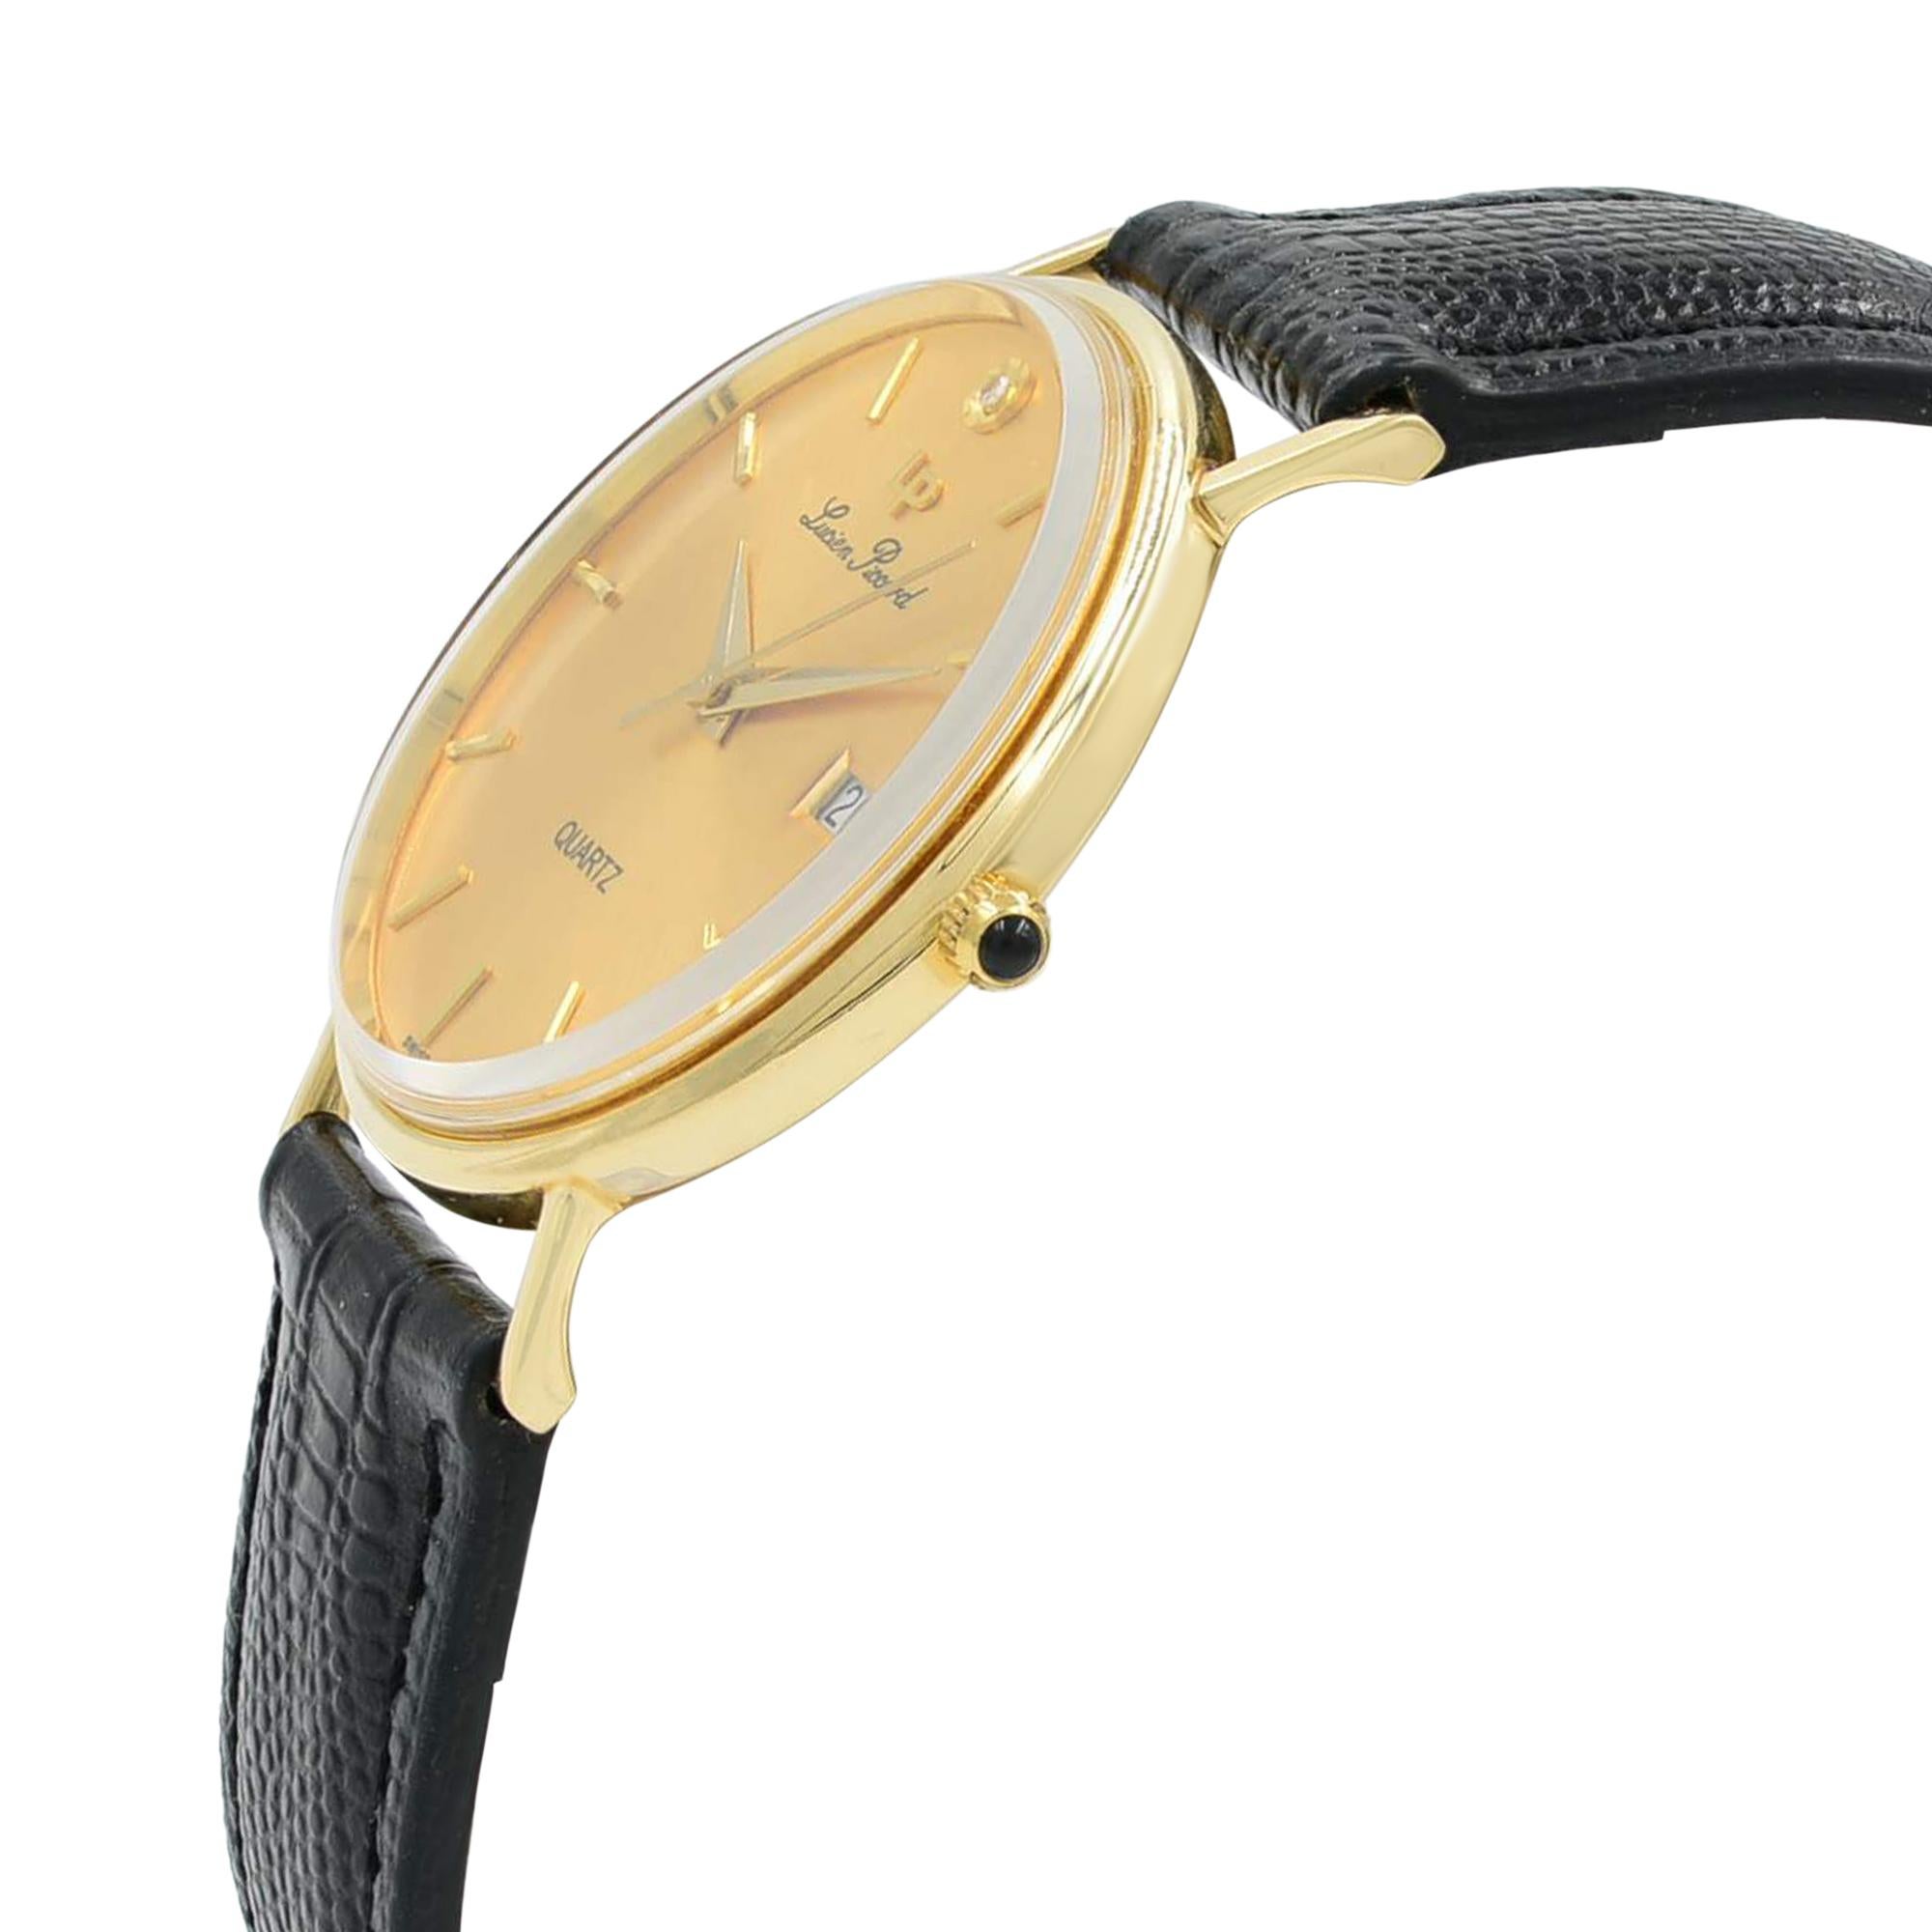 This pre-owned Lucien Piccard Vintage N/A is a beautiful men's timepiece that is powered by a quartz movement which is cased in a yellow gold case. It has a round shape face, date, diamonds dial and has hand sticks style markers. It is completed